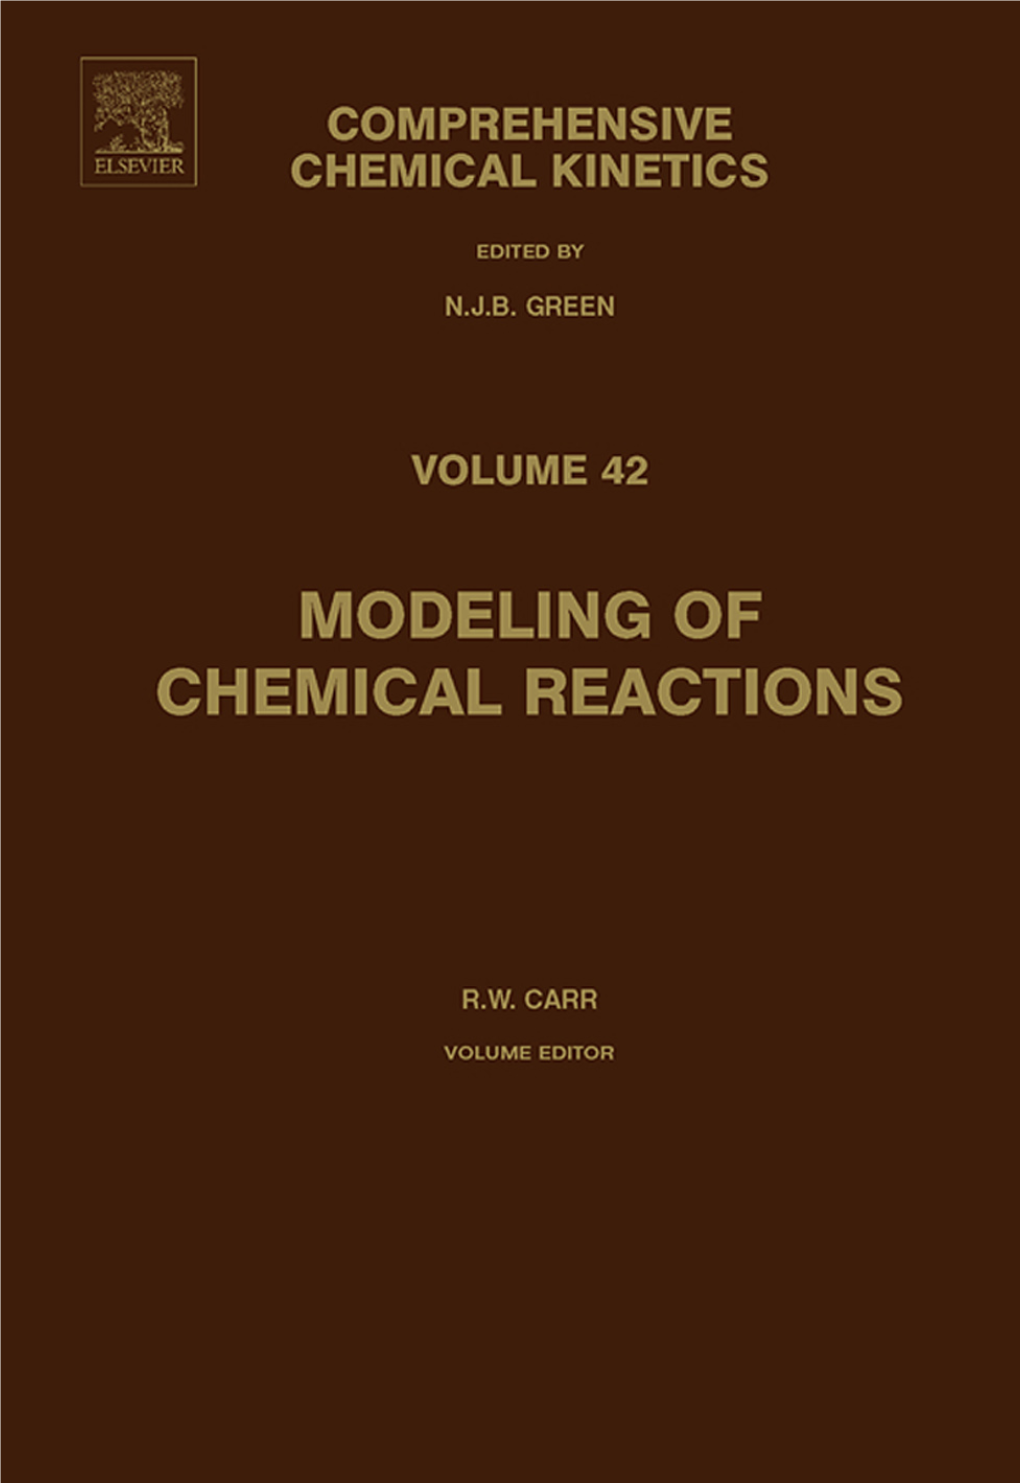 Modeling of Chemical Reactions. Volume 42